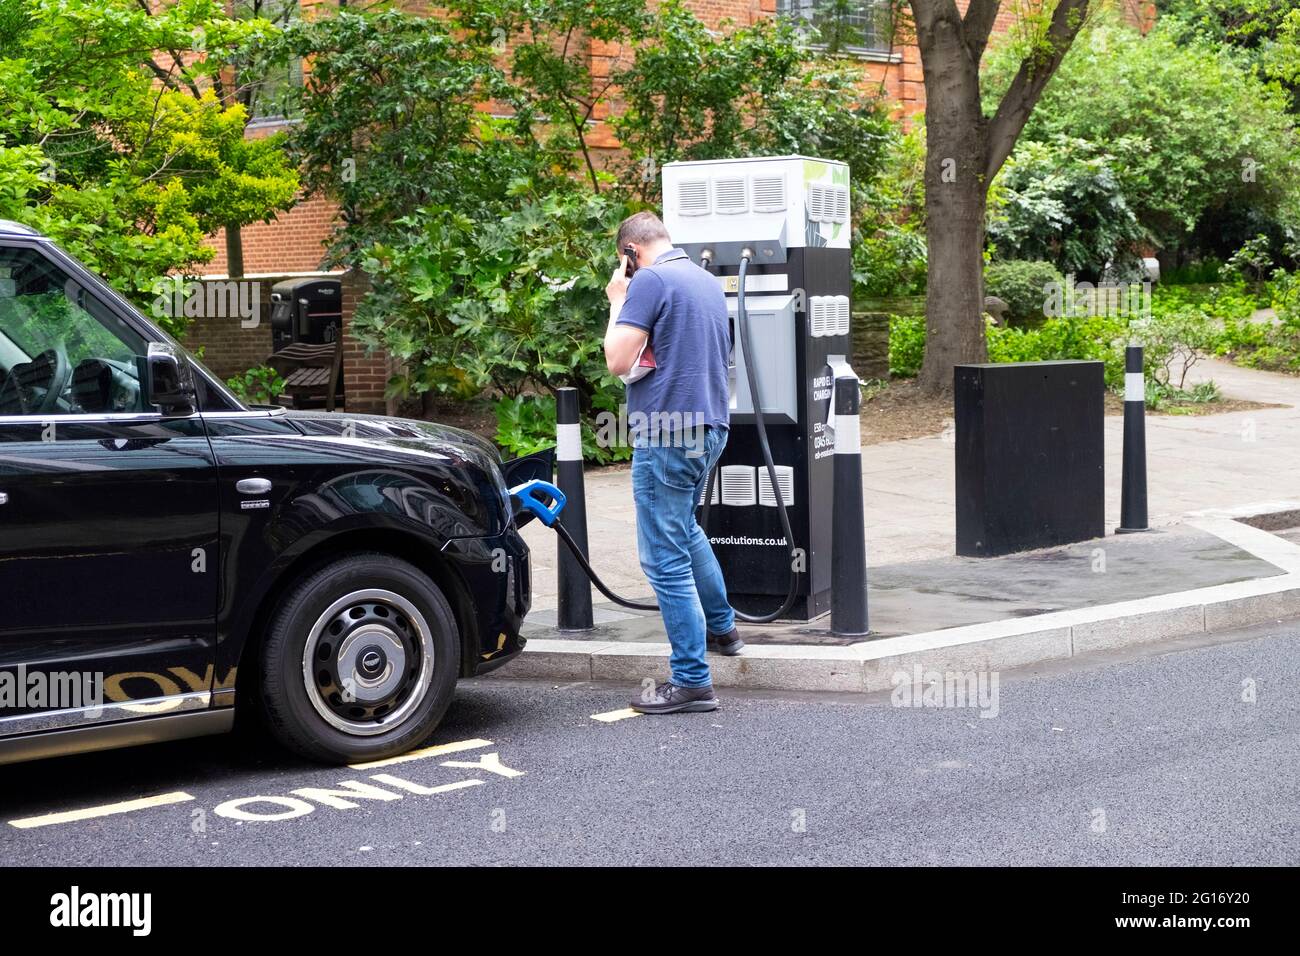 Black taxi cab driver recharging his e taxi at an electric charging point in the City of London England UK  KATHY DEWITT Stock Photo